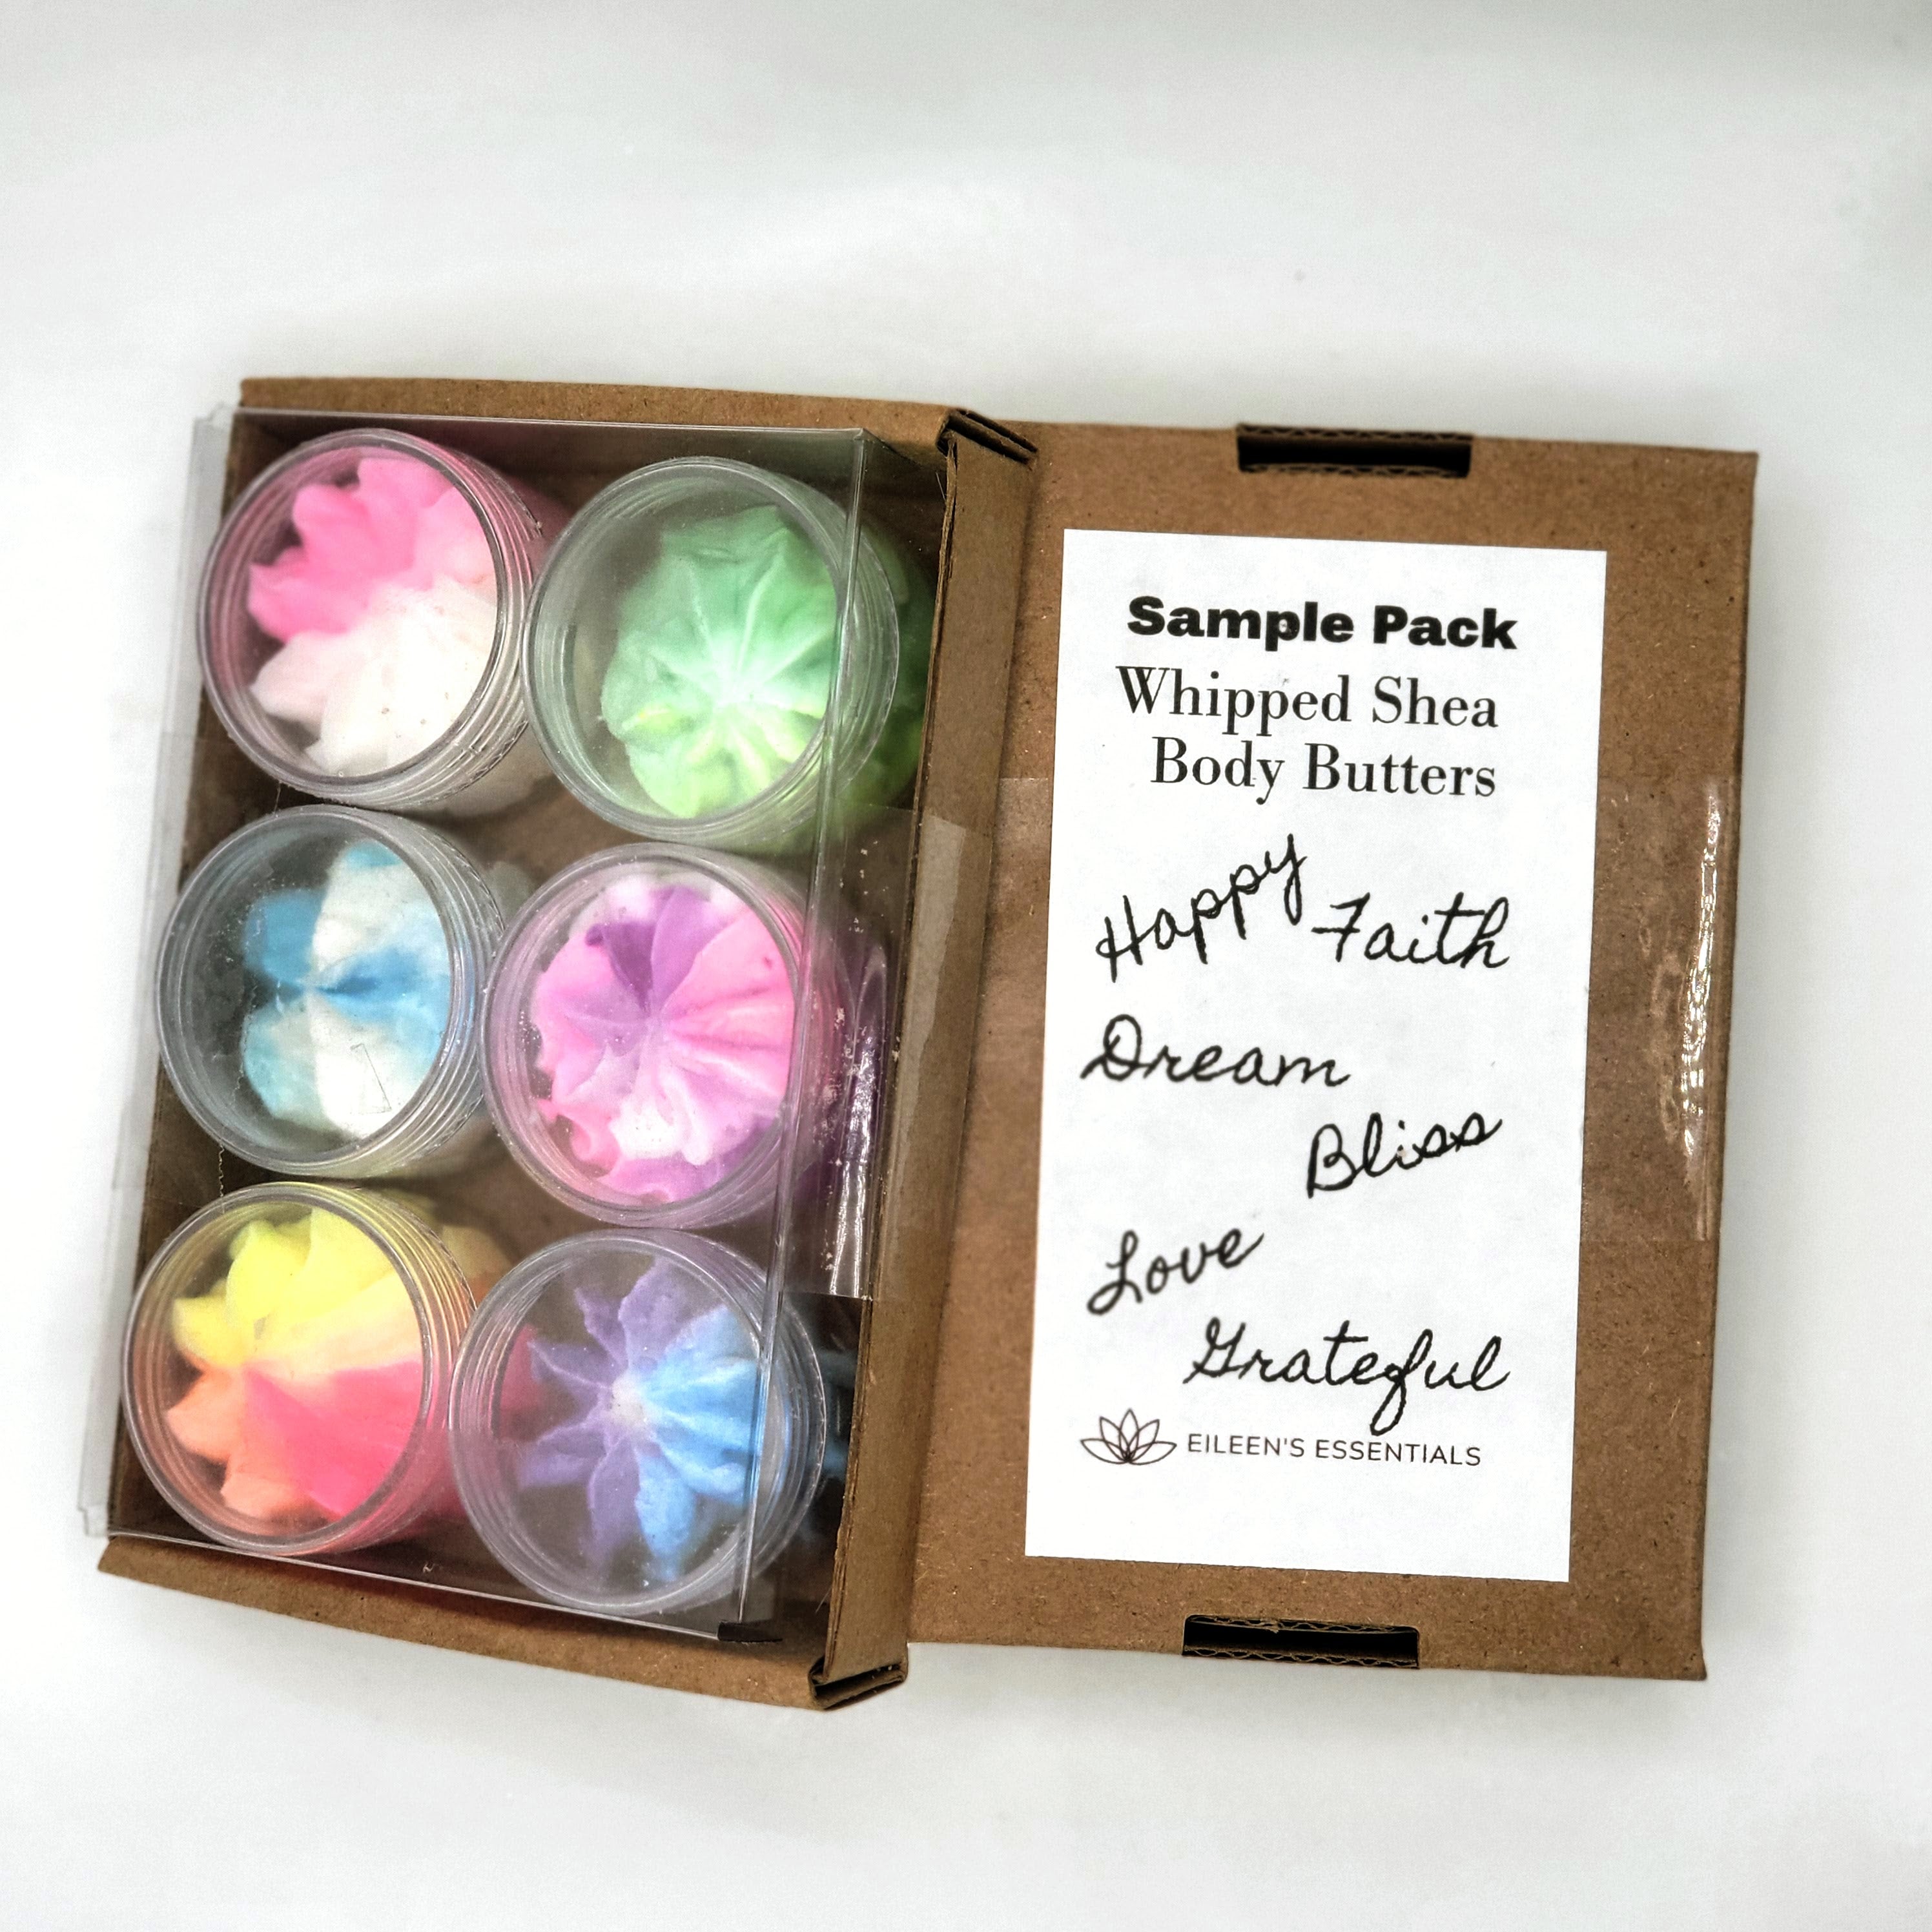 Sample Pack of Whipped Shea Body Butters